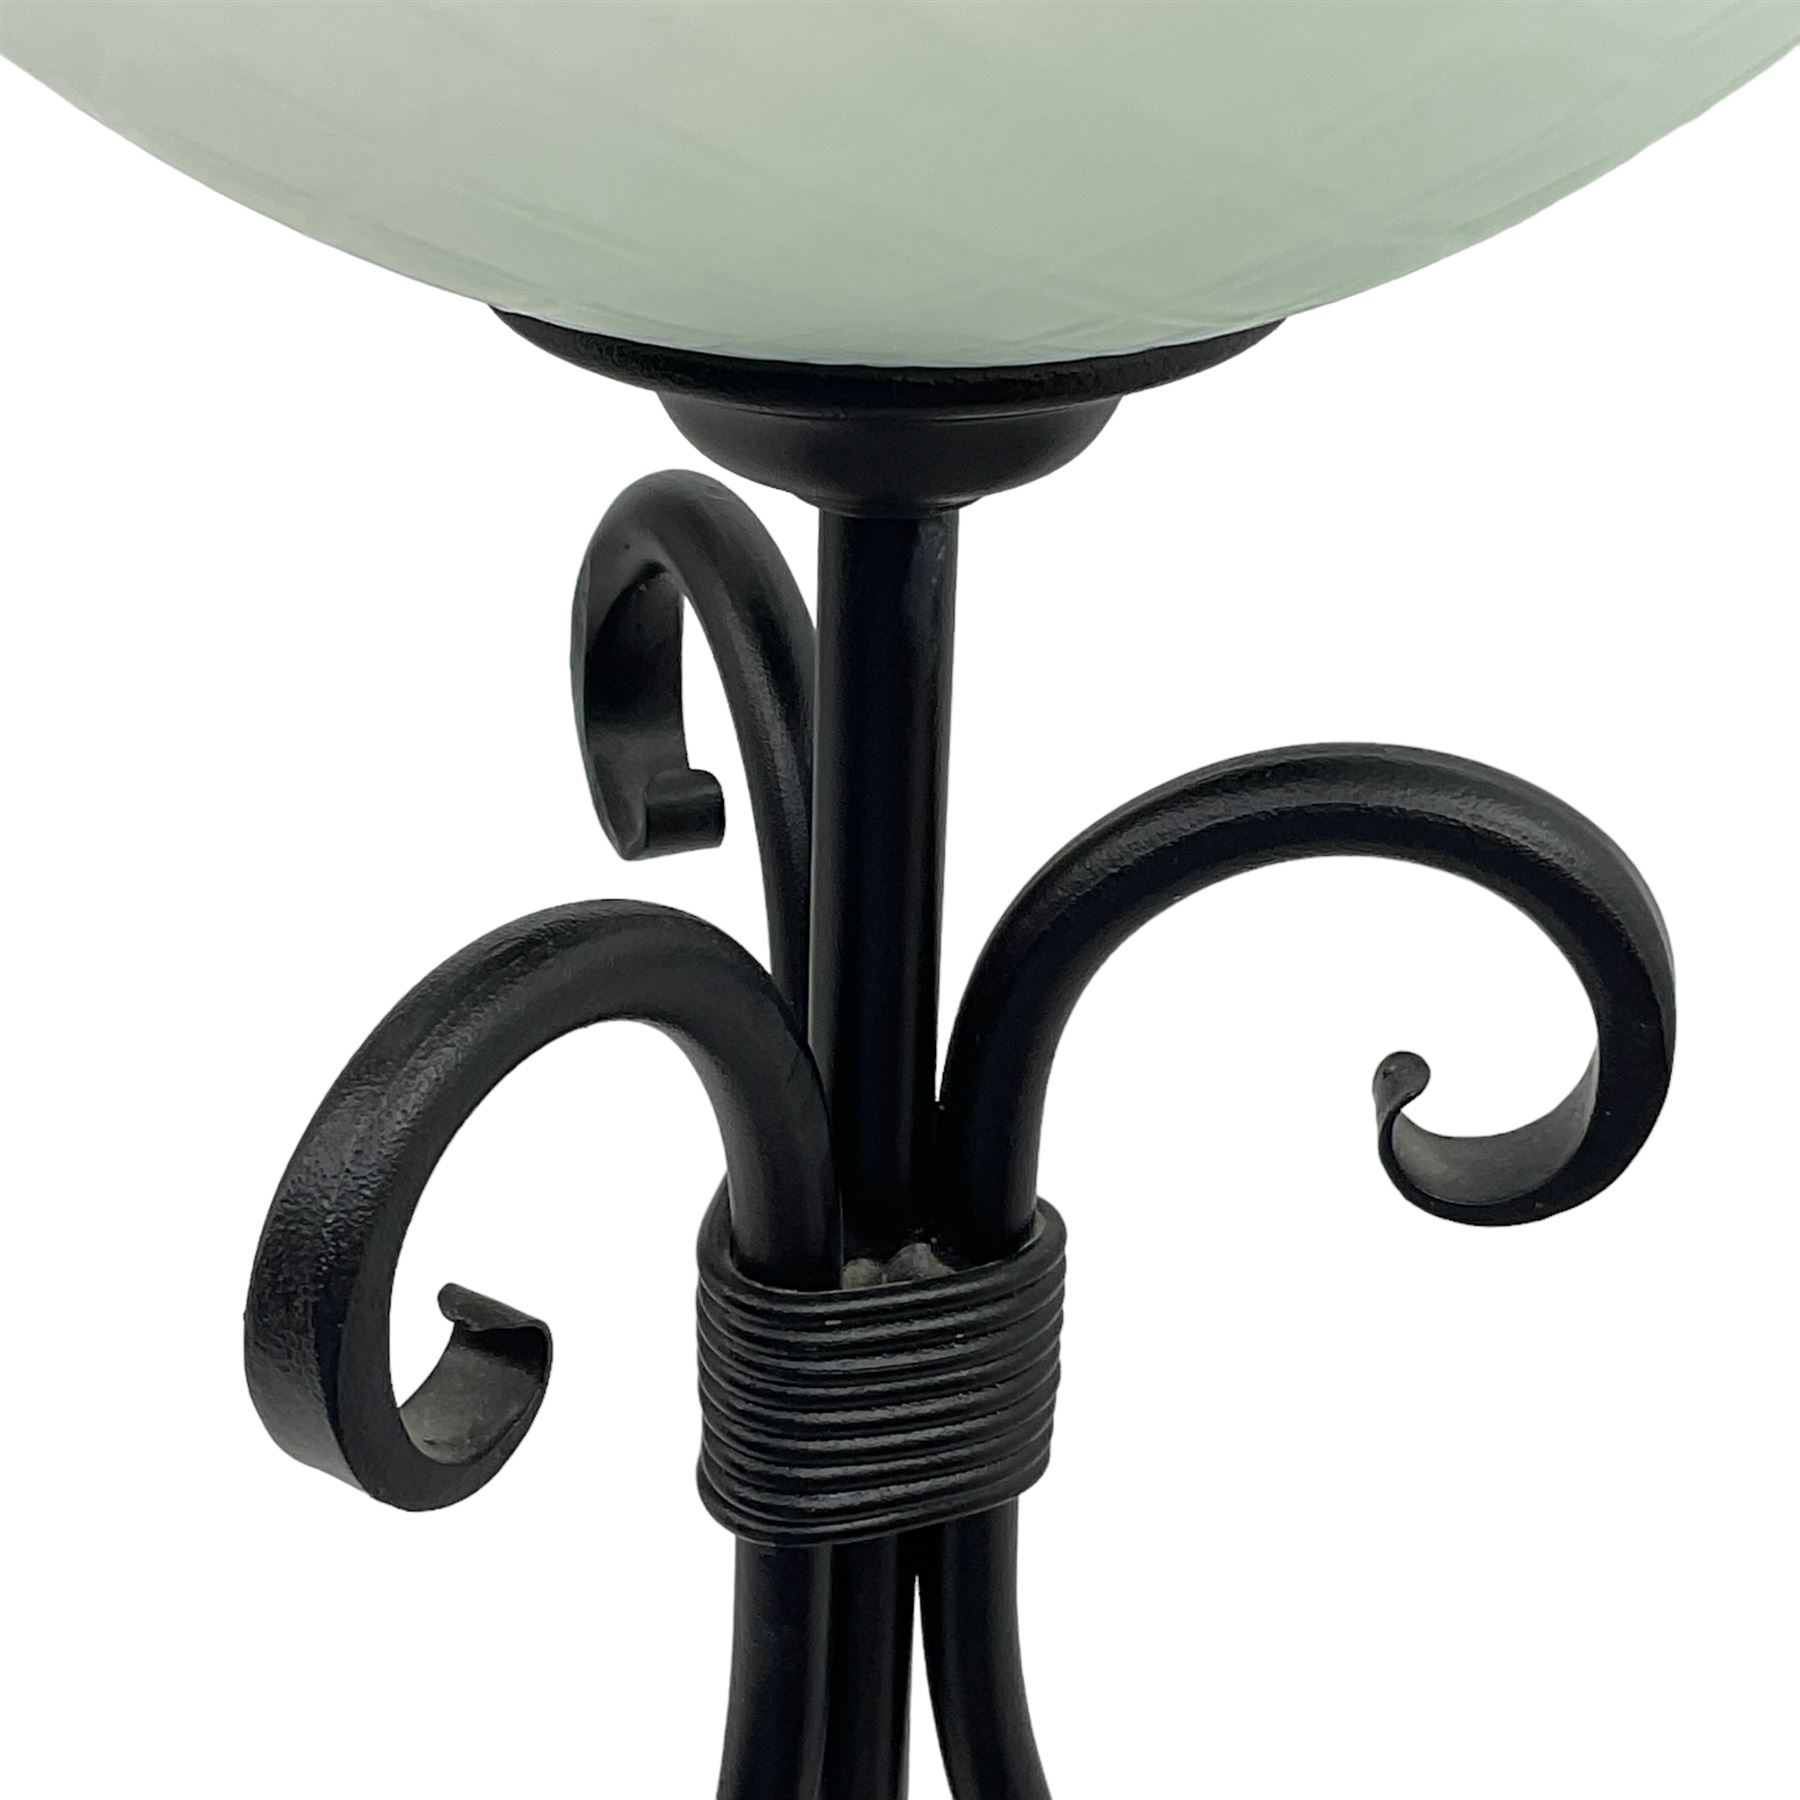 Pair of black finish wrought metal standard lamps with glass shades - Image 6 of 6